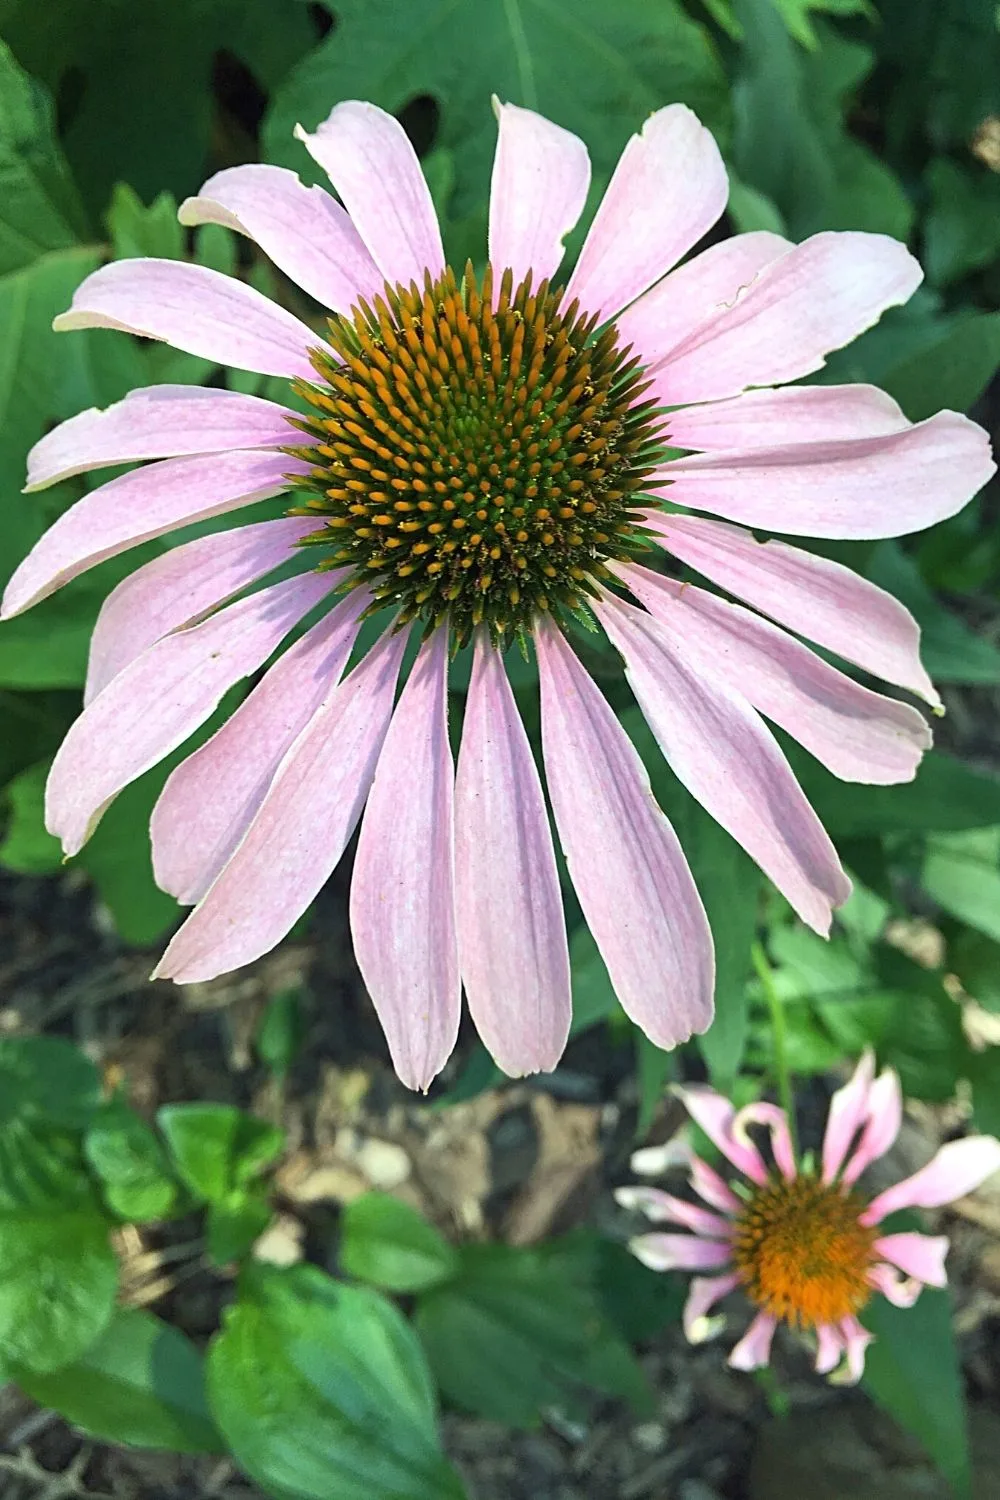 Coneflower is another partial-to-full-sun loving plant that will thrive in a west-facing side of the house 